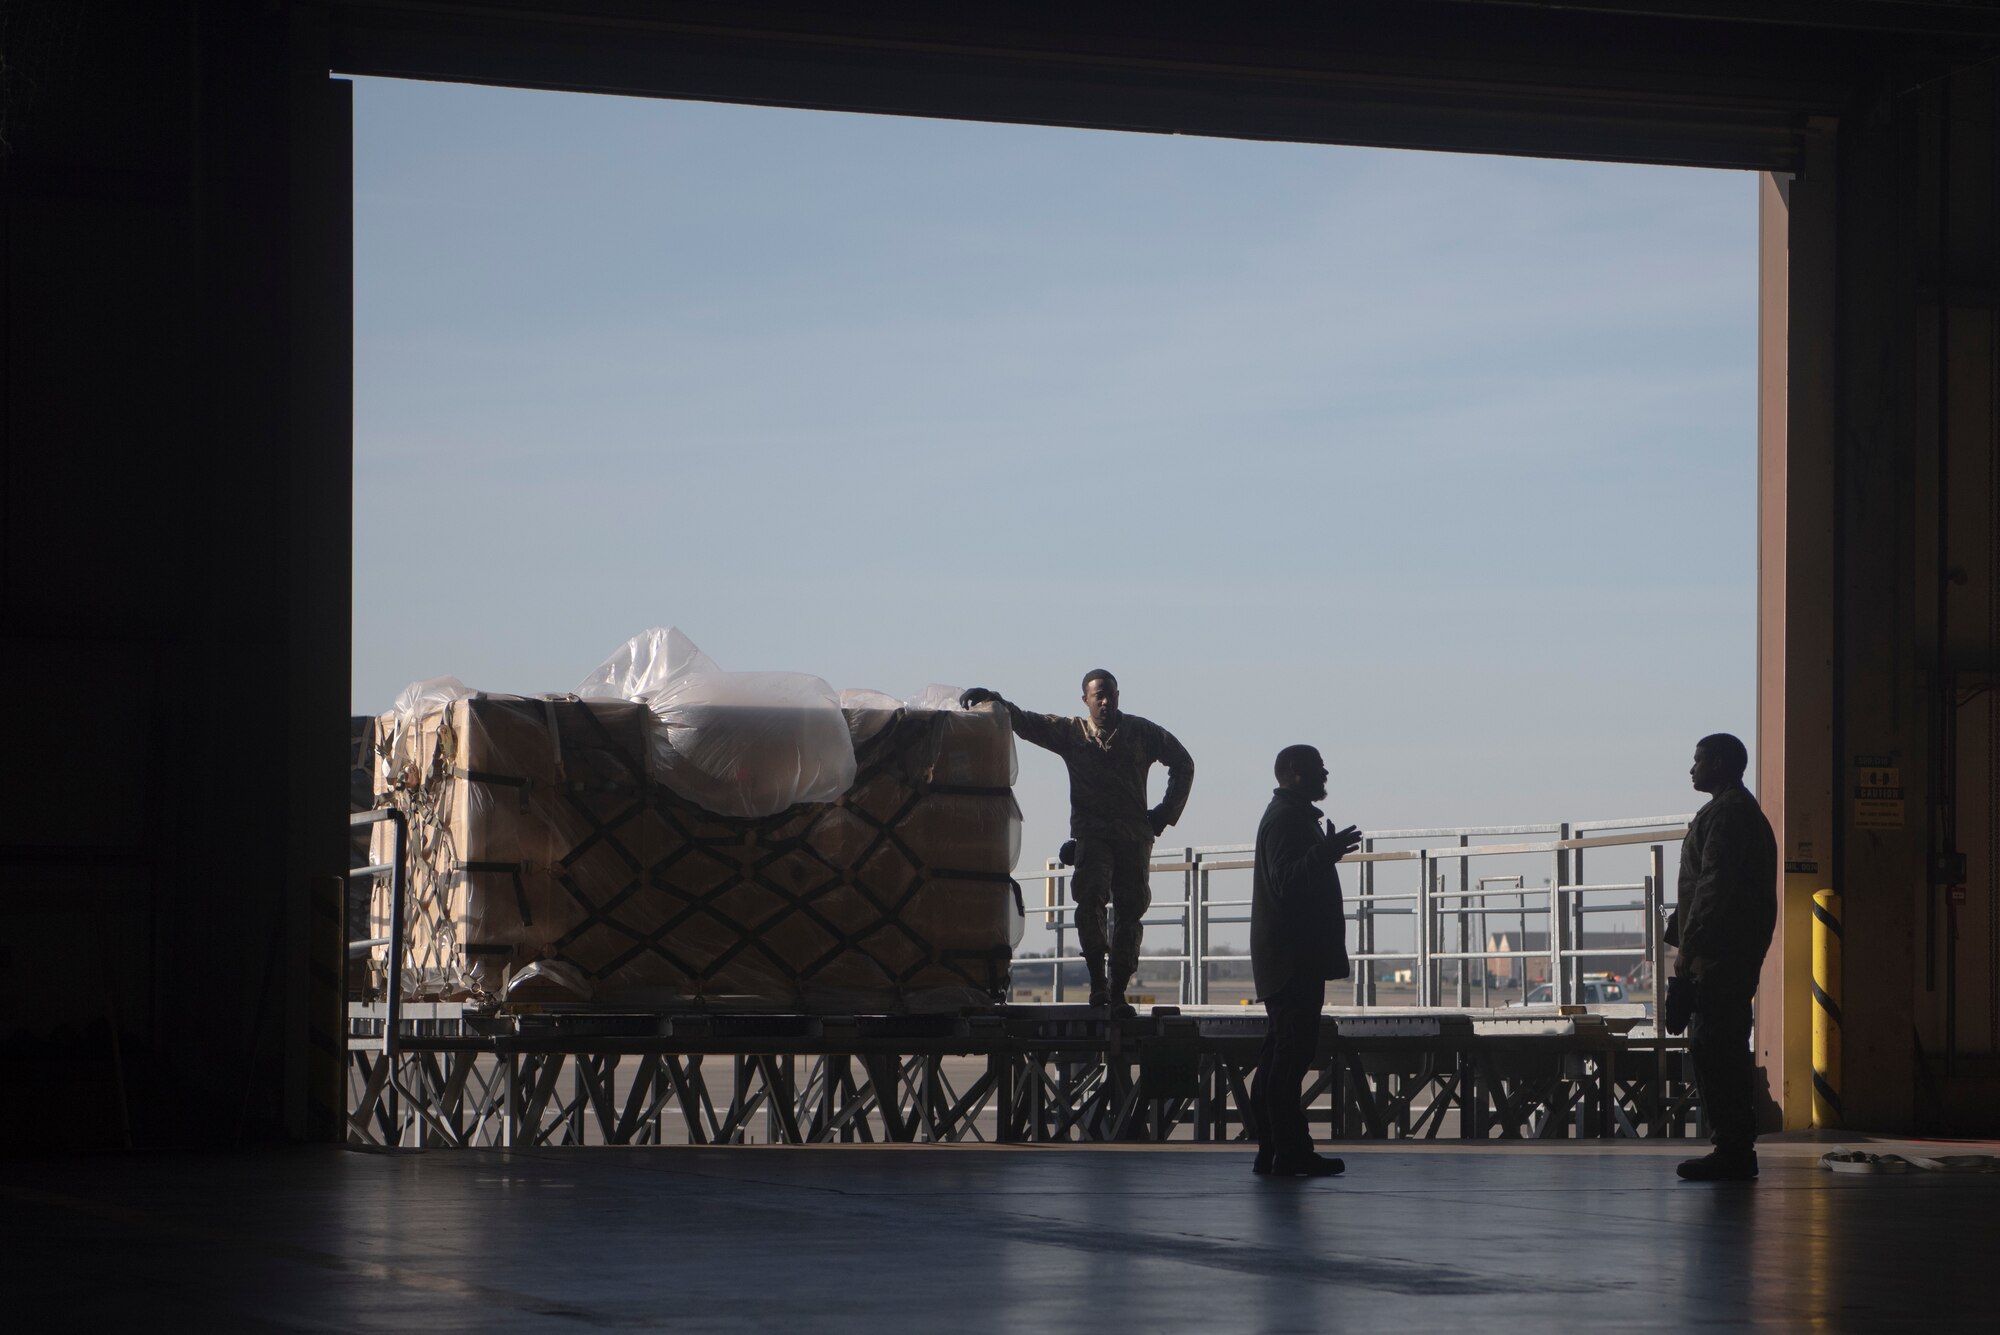 Airmen of the 727th Air Mobility Squadron take a break after transferring cargo from the flight line to their warehouse March 24, 2020, at RAF Mildenhall, England. Their schedule is influenced by how many aircraft arrive and the amount of cargo that needs to be unloaded . (U.S. Air Force photo by Airman 1st Class Joseph Barron)